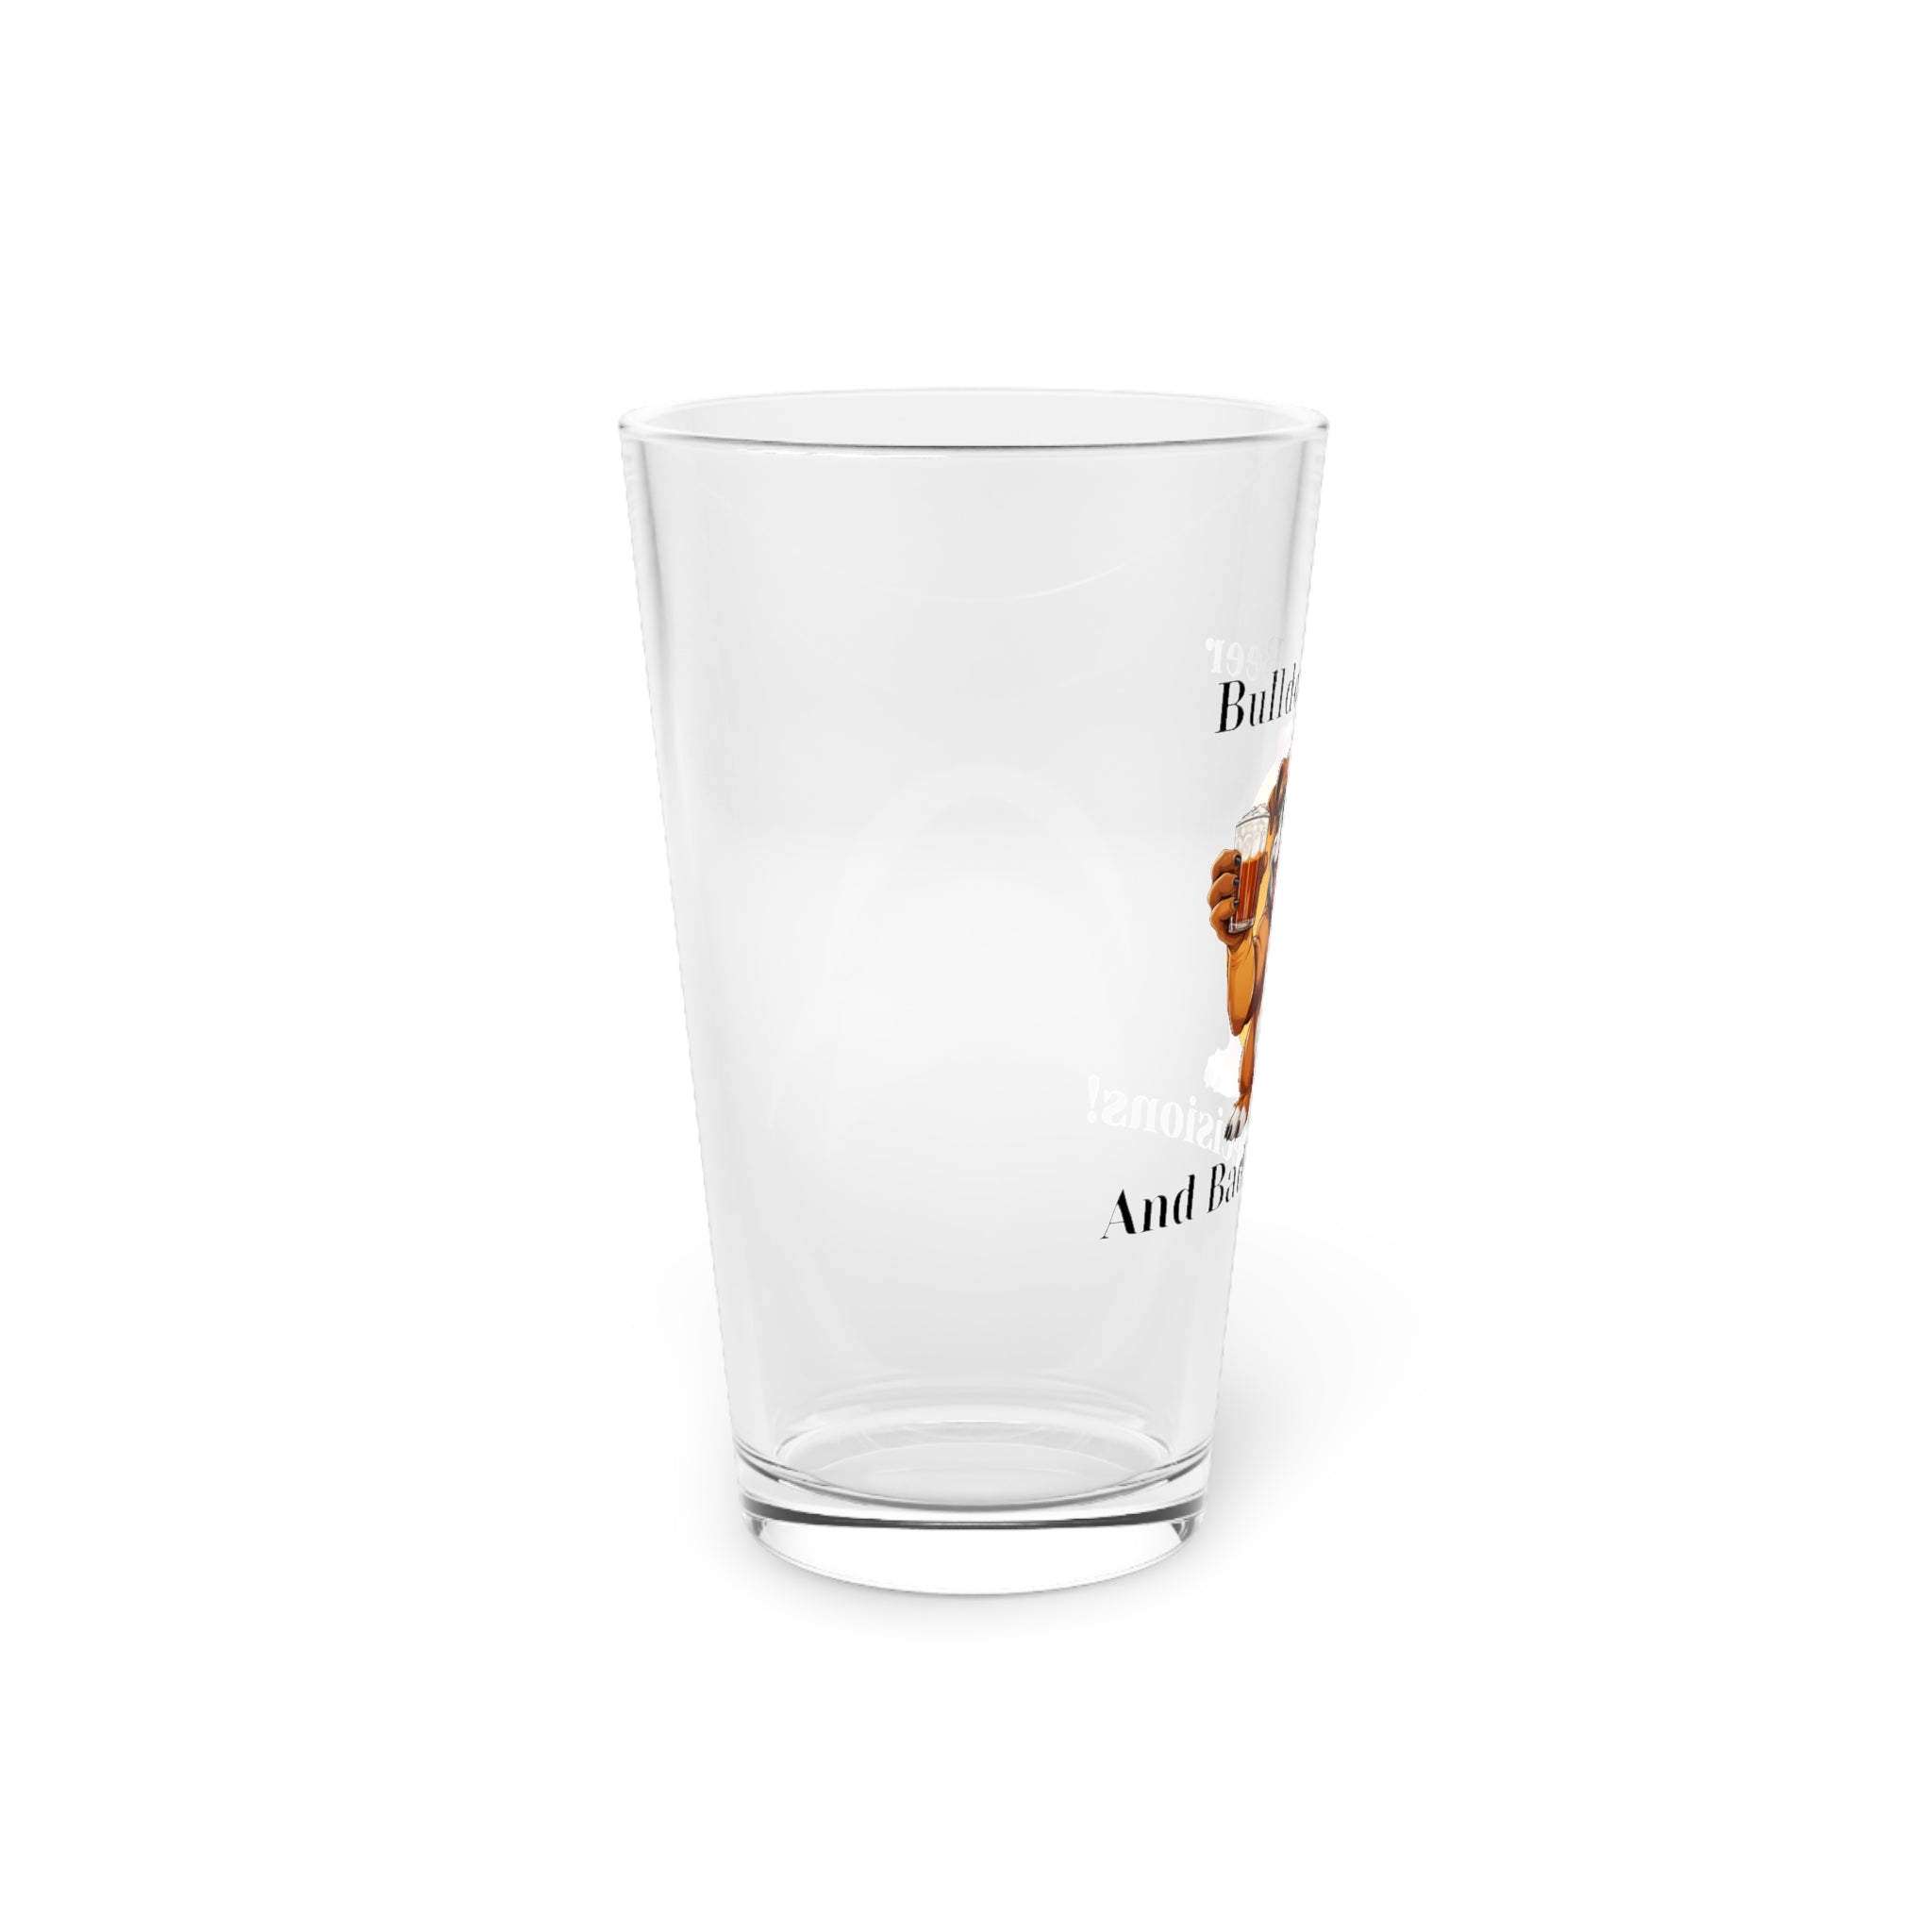 Bulldogs, Beer, and Bad Decisions!" - The Ultimate Pint Glass by Tipsy Bully (English/Brown)